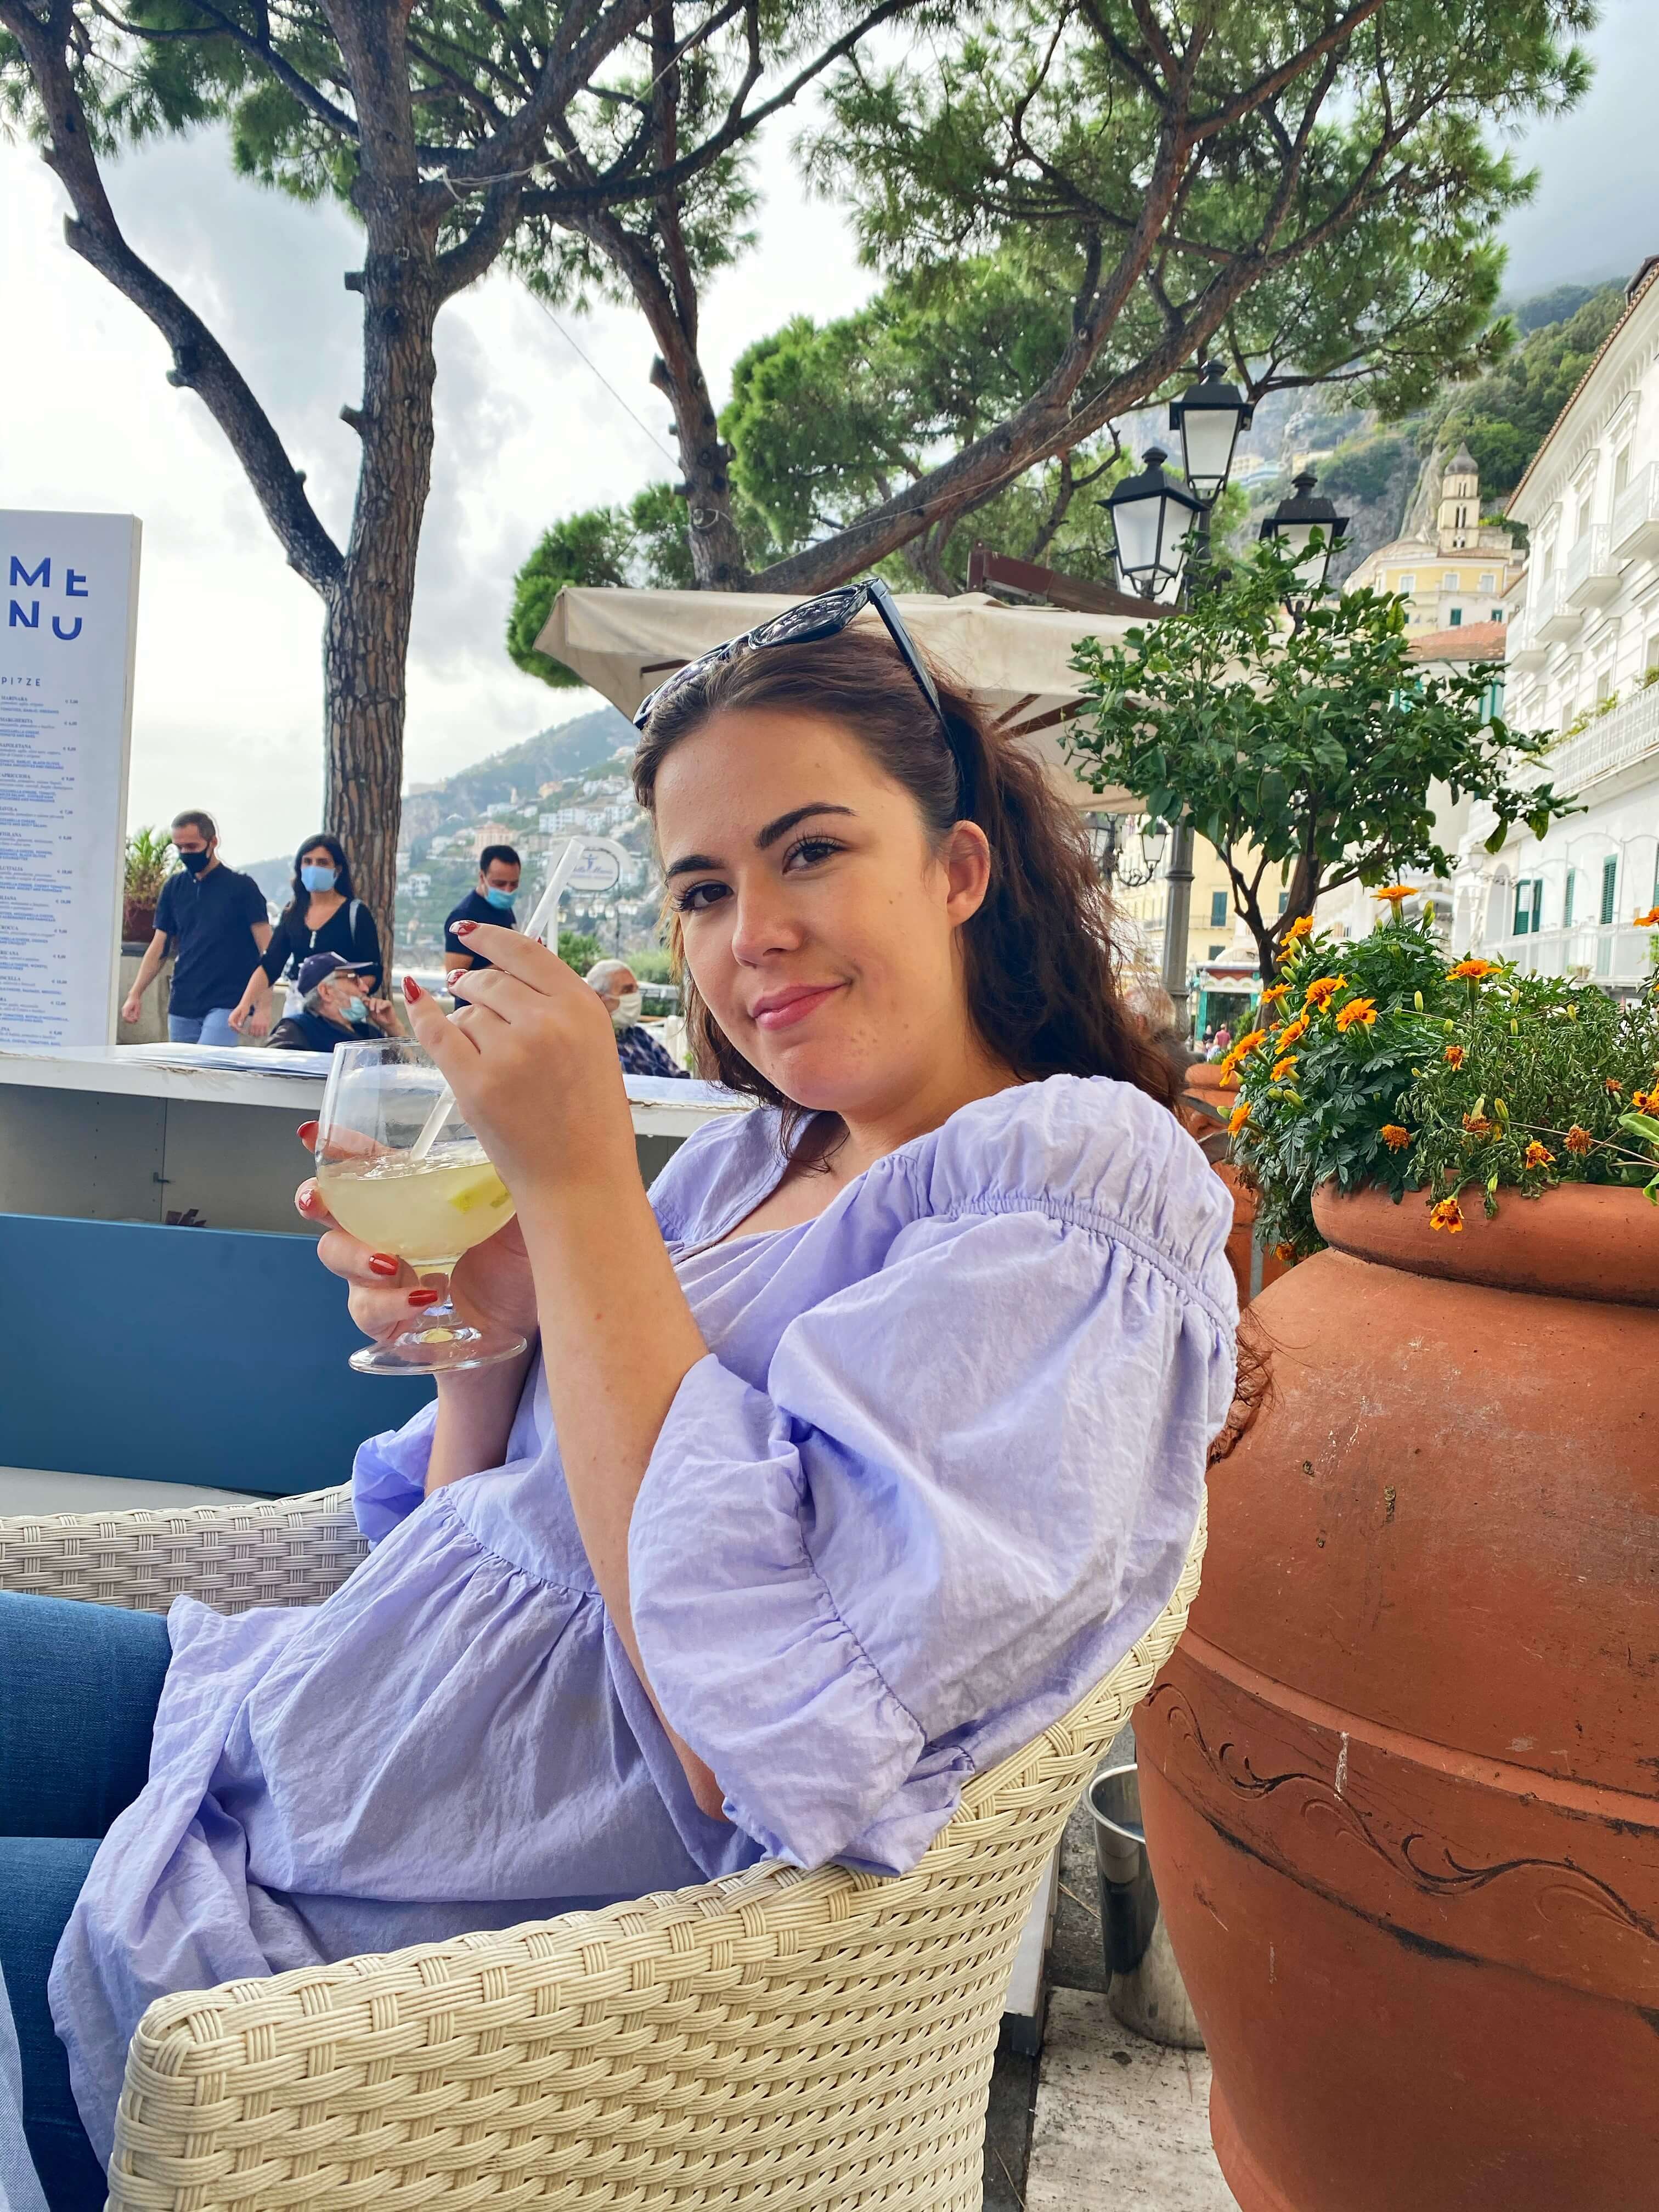 A young woman sitting in a chair in an outdoor restaurant, holding a drink